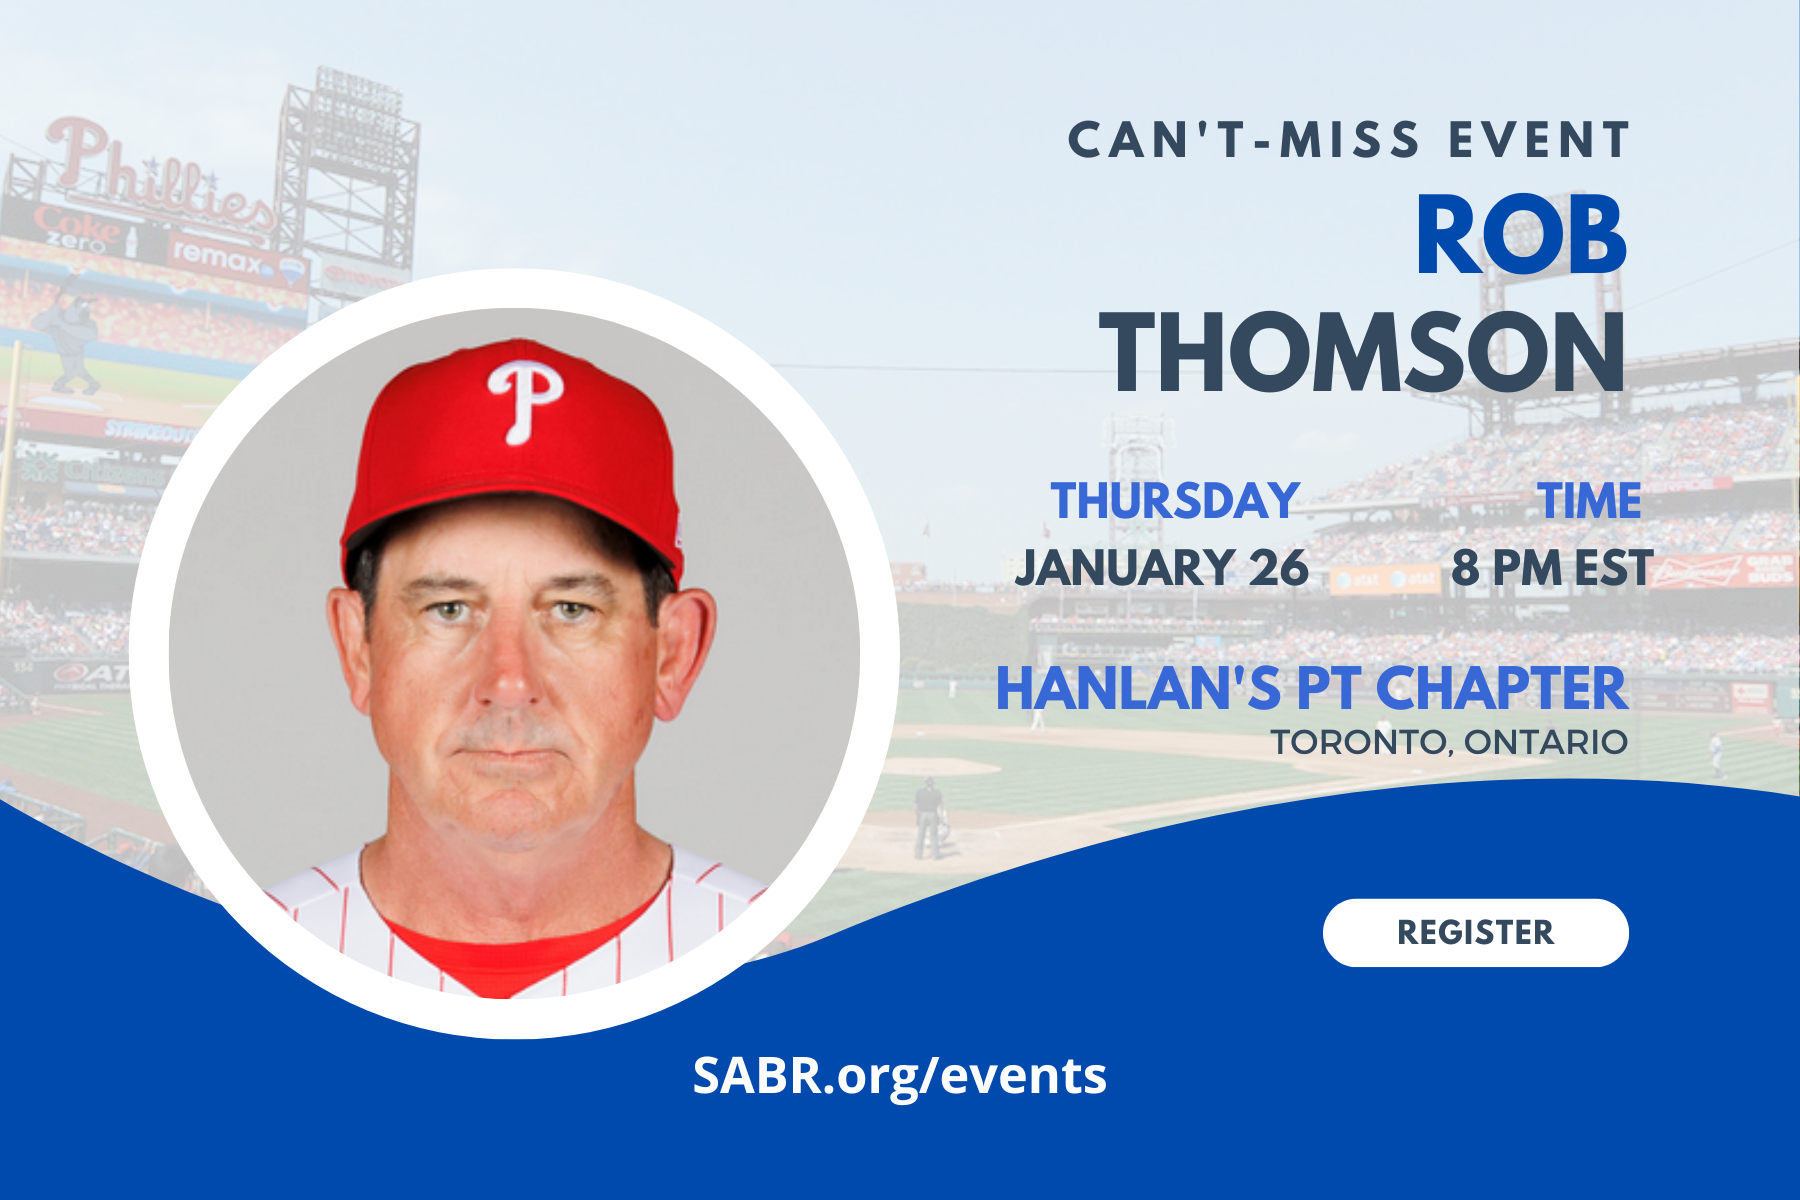 The Hanlan’s Point Chapter is pleased to announce Rob Thomson, Manager of the Philadelphia Phillies, will be our featured speaker for our 2023 SABR Day meeting. Please note the special meeting time of Thursday, January 26 at 8 PM Eastern via Zoom. Author Justin Mckinney will also give a presentation. Click here to register: https://www.eventbrite.ca/e/506806470797